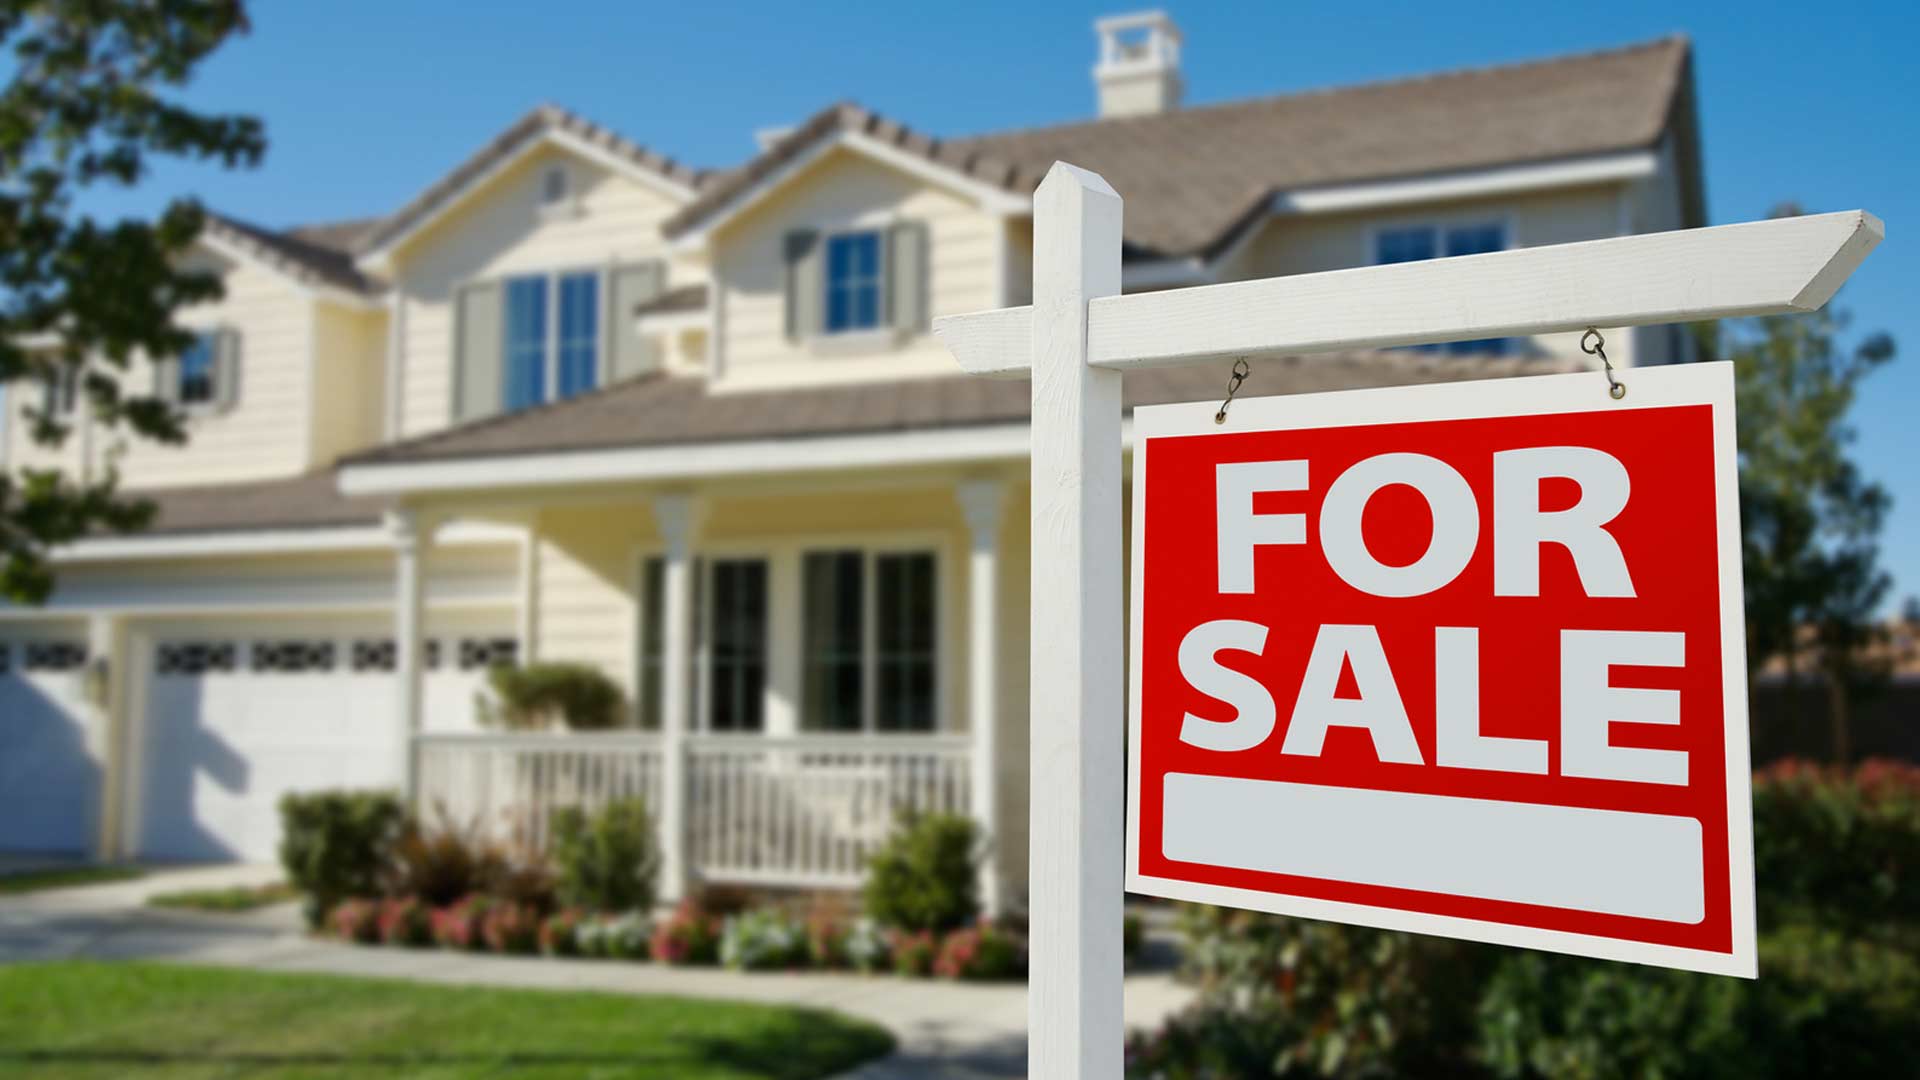 How to Sell Your Home Quickly